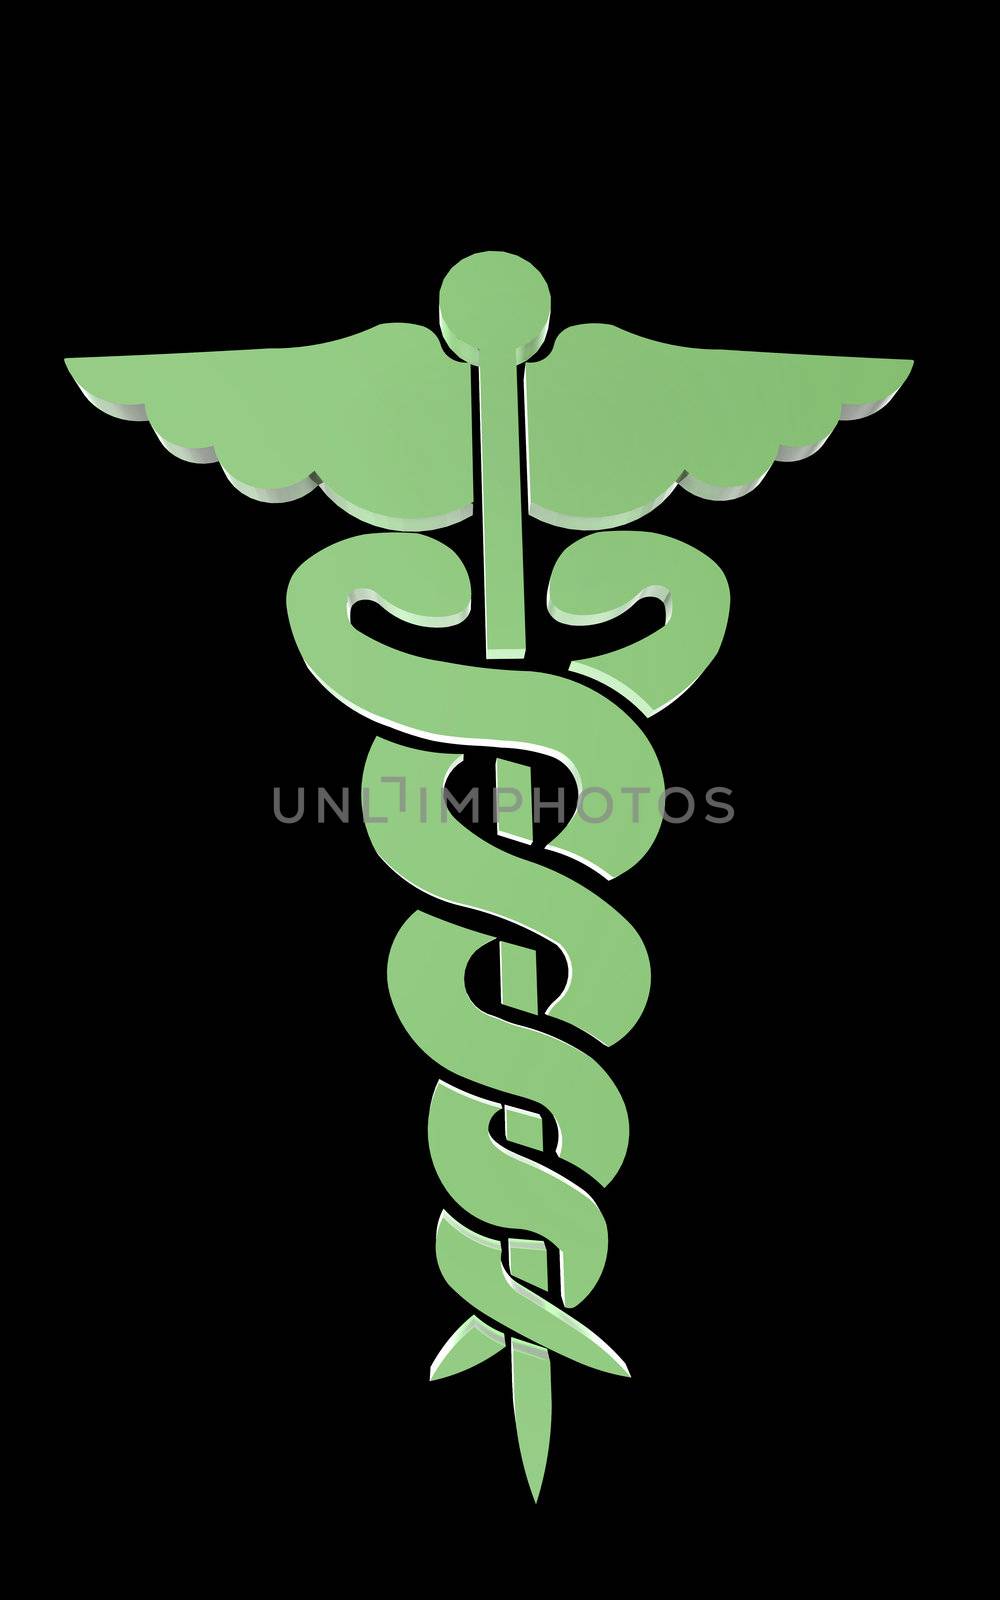 Caduceus over a black background by andromeda13